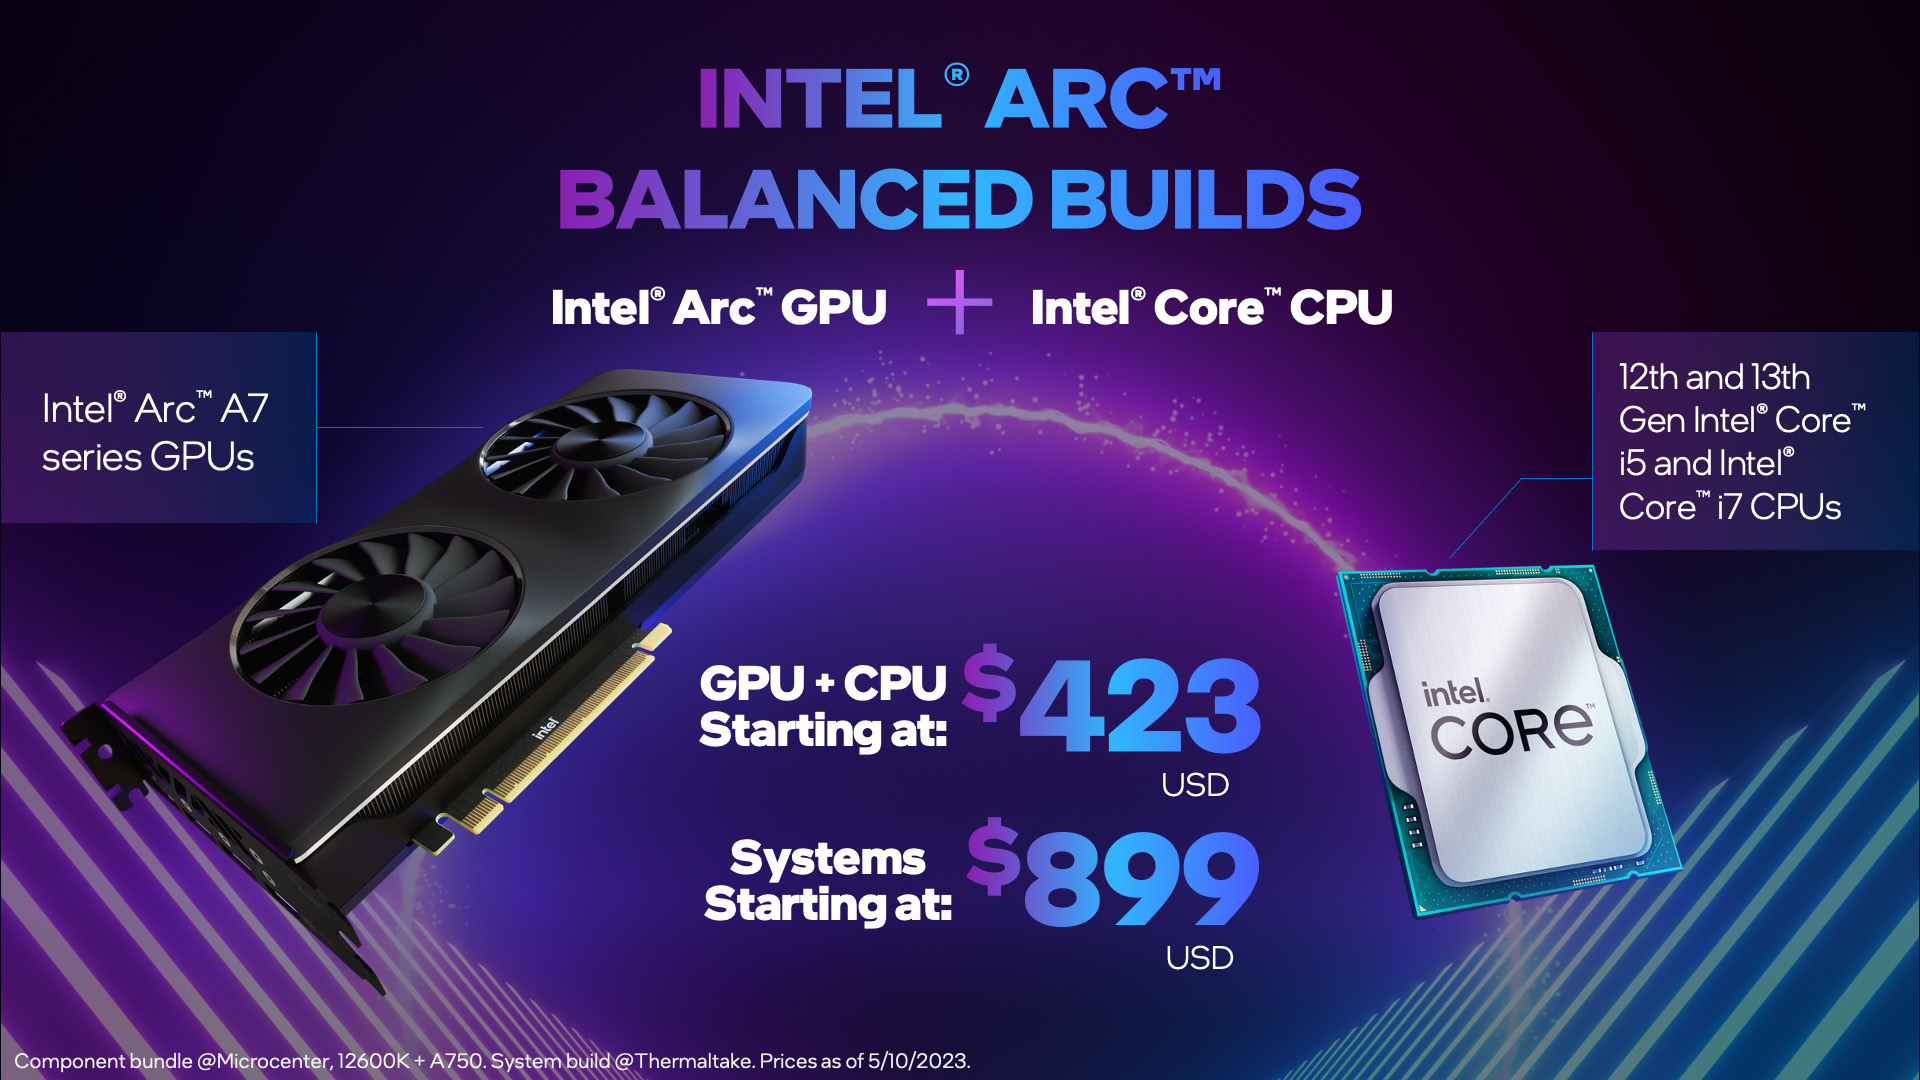 Promotional material for the Intel Arc Balanced Builds program.